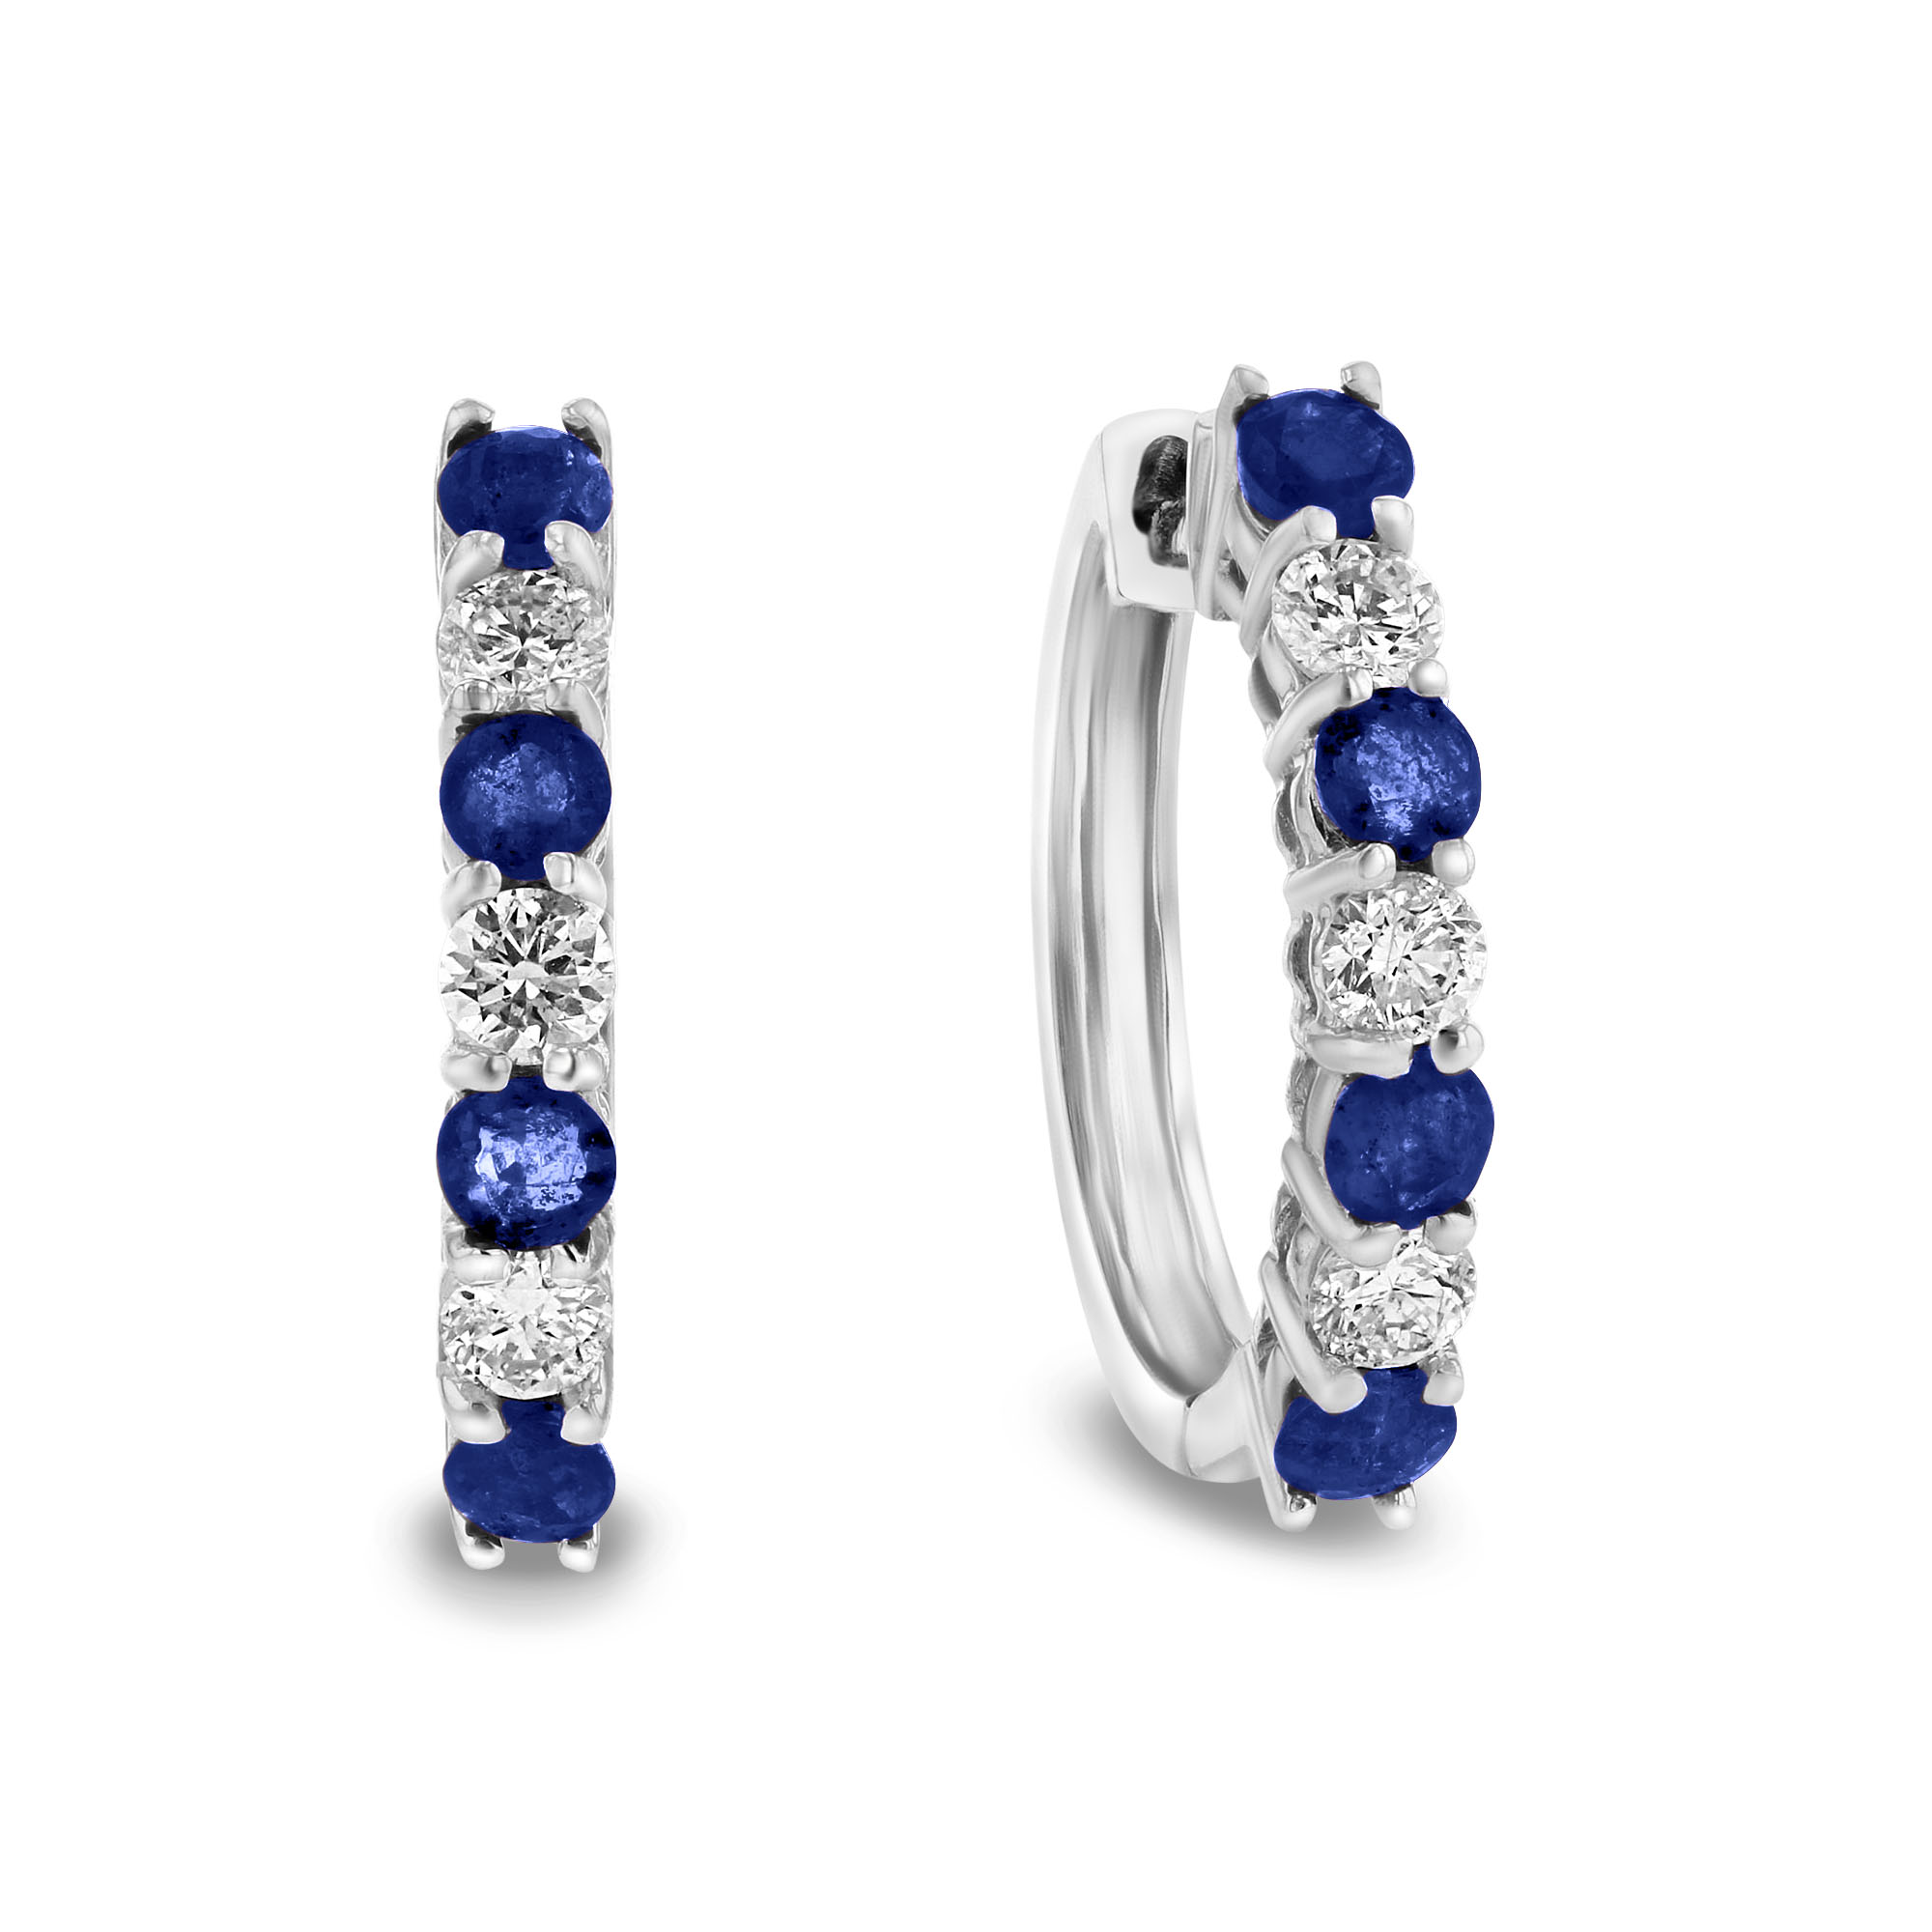 1.15ctw Diamond and Sapphire Hoop Earrings in 14k White Gold